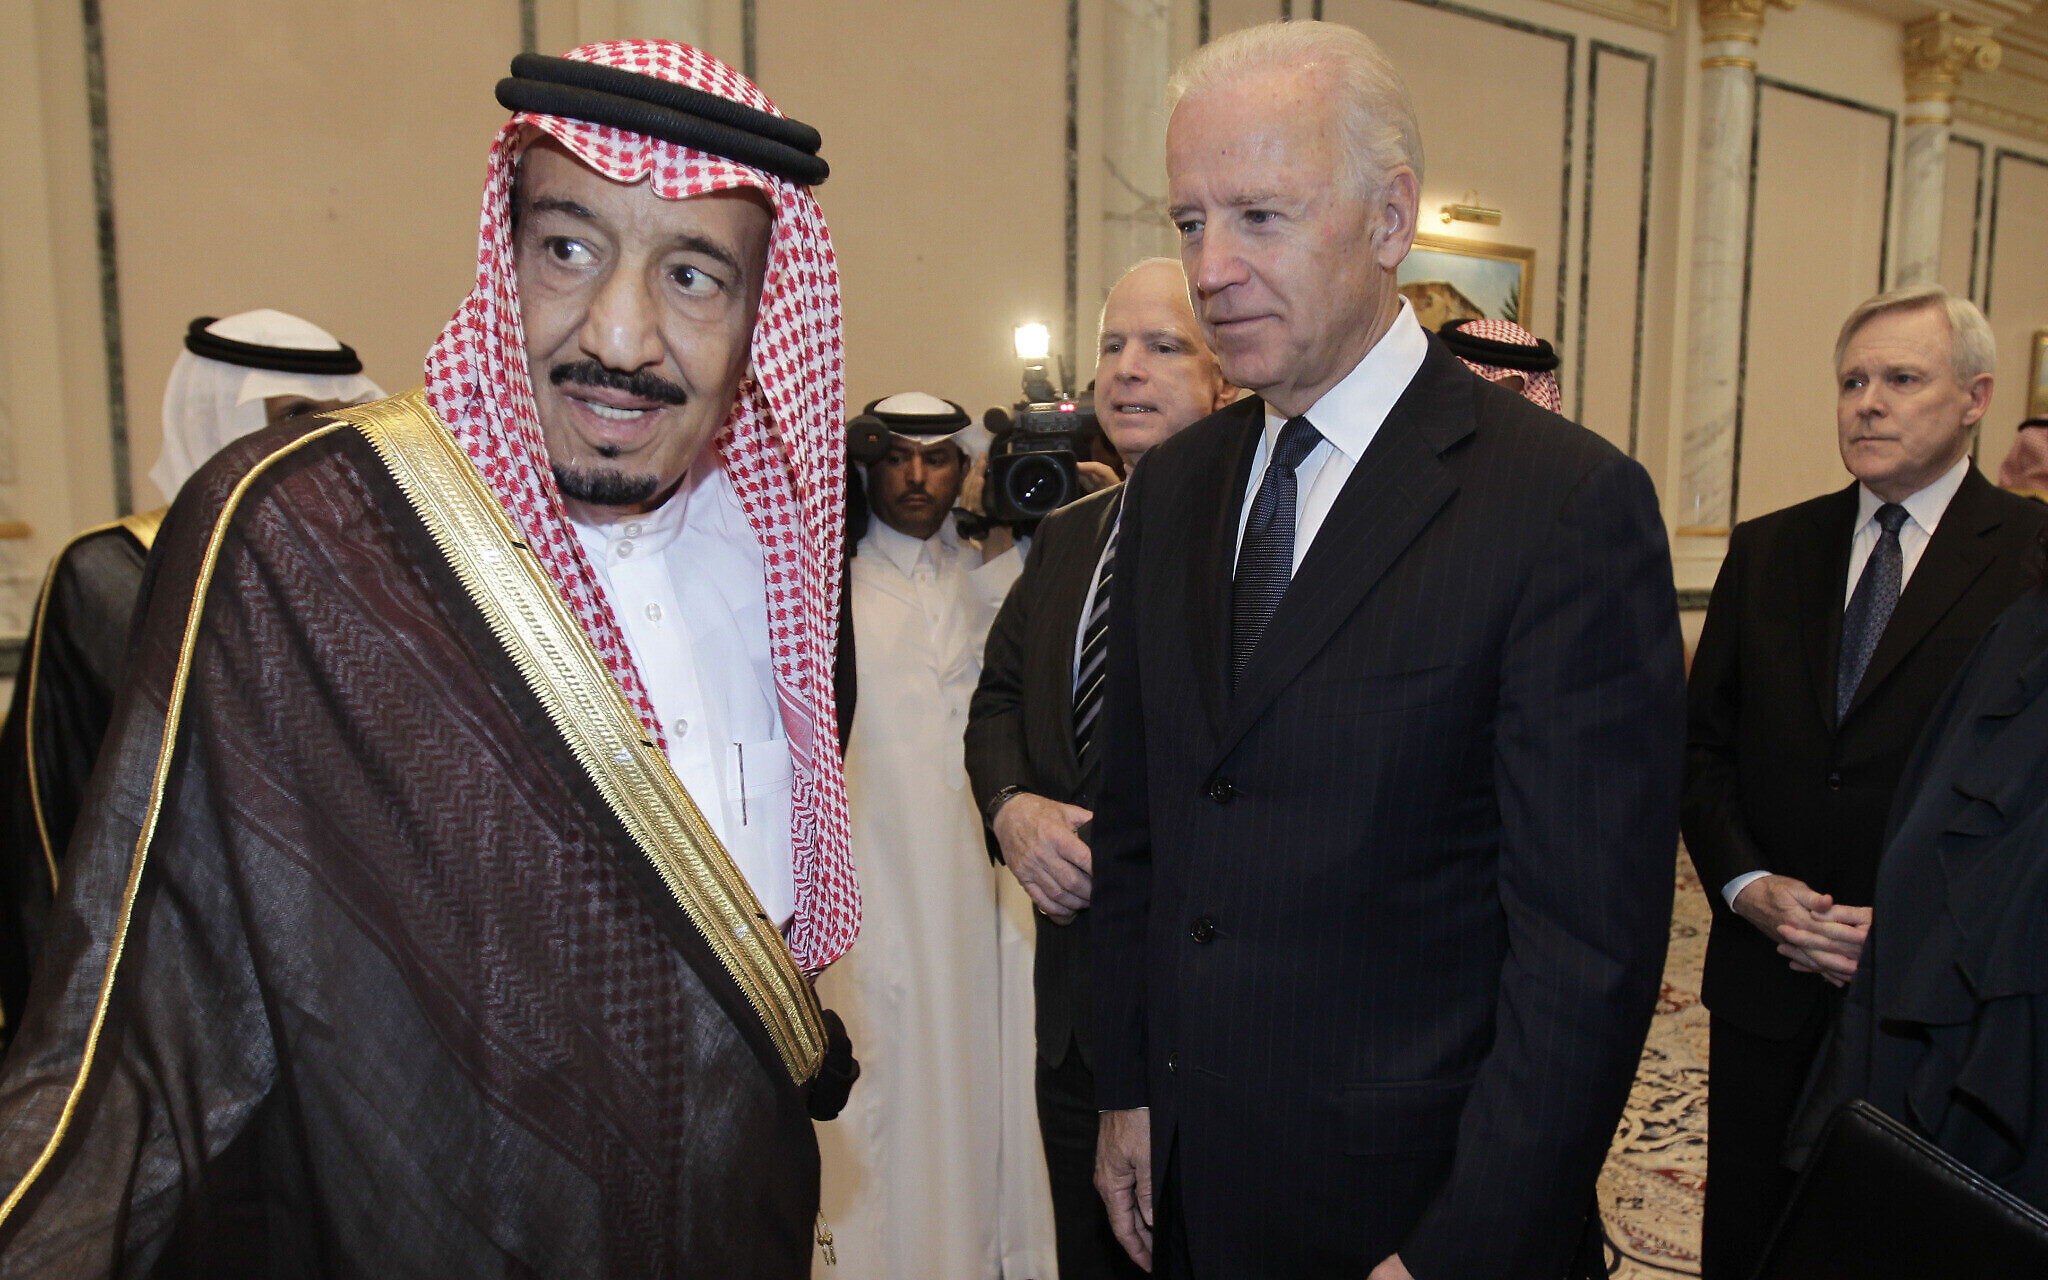 FILE - In this Thursday, Oct. 27, 2011 file photo, U.S. Vice President Joe Biden, right, offers his condolences to Prince Salman bin Abdel-Aziz  upon the death of on his brother  Saudi Crown Prince Sultan bin Abdul-Aziz Al Saud,  at Prince Sultan palace in Riyadh, Saudi Arabia. Saudi Arabia has named a new defense minister to replace the late crown prince who held the post. King Abdullah appointed Prince Salman bin Abdul-Aziz Al Saud minister of defense and aviation on Saturday. Prince Salman replaces Crown Prince Sultan, who died Oct. 22. (AP Photo/Hassan Ammar, File)